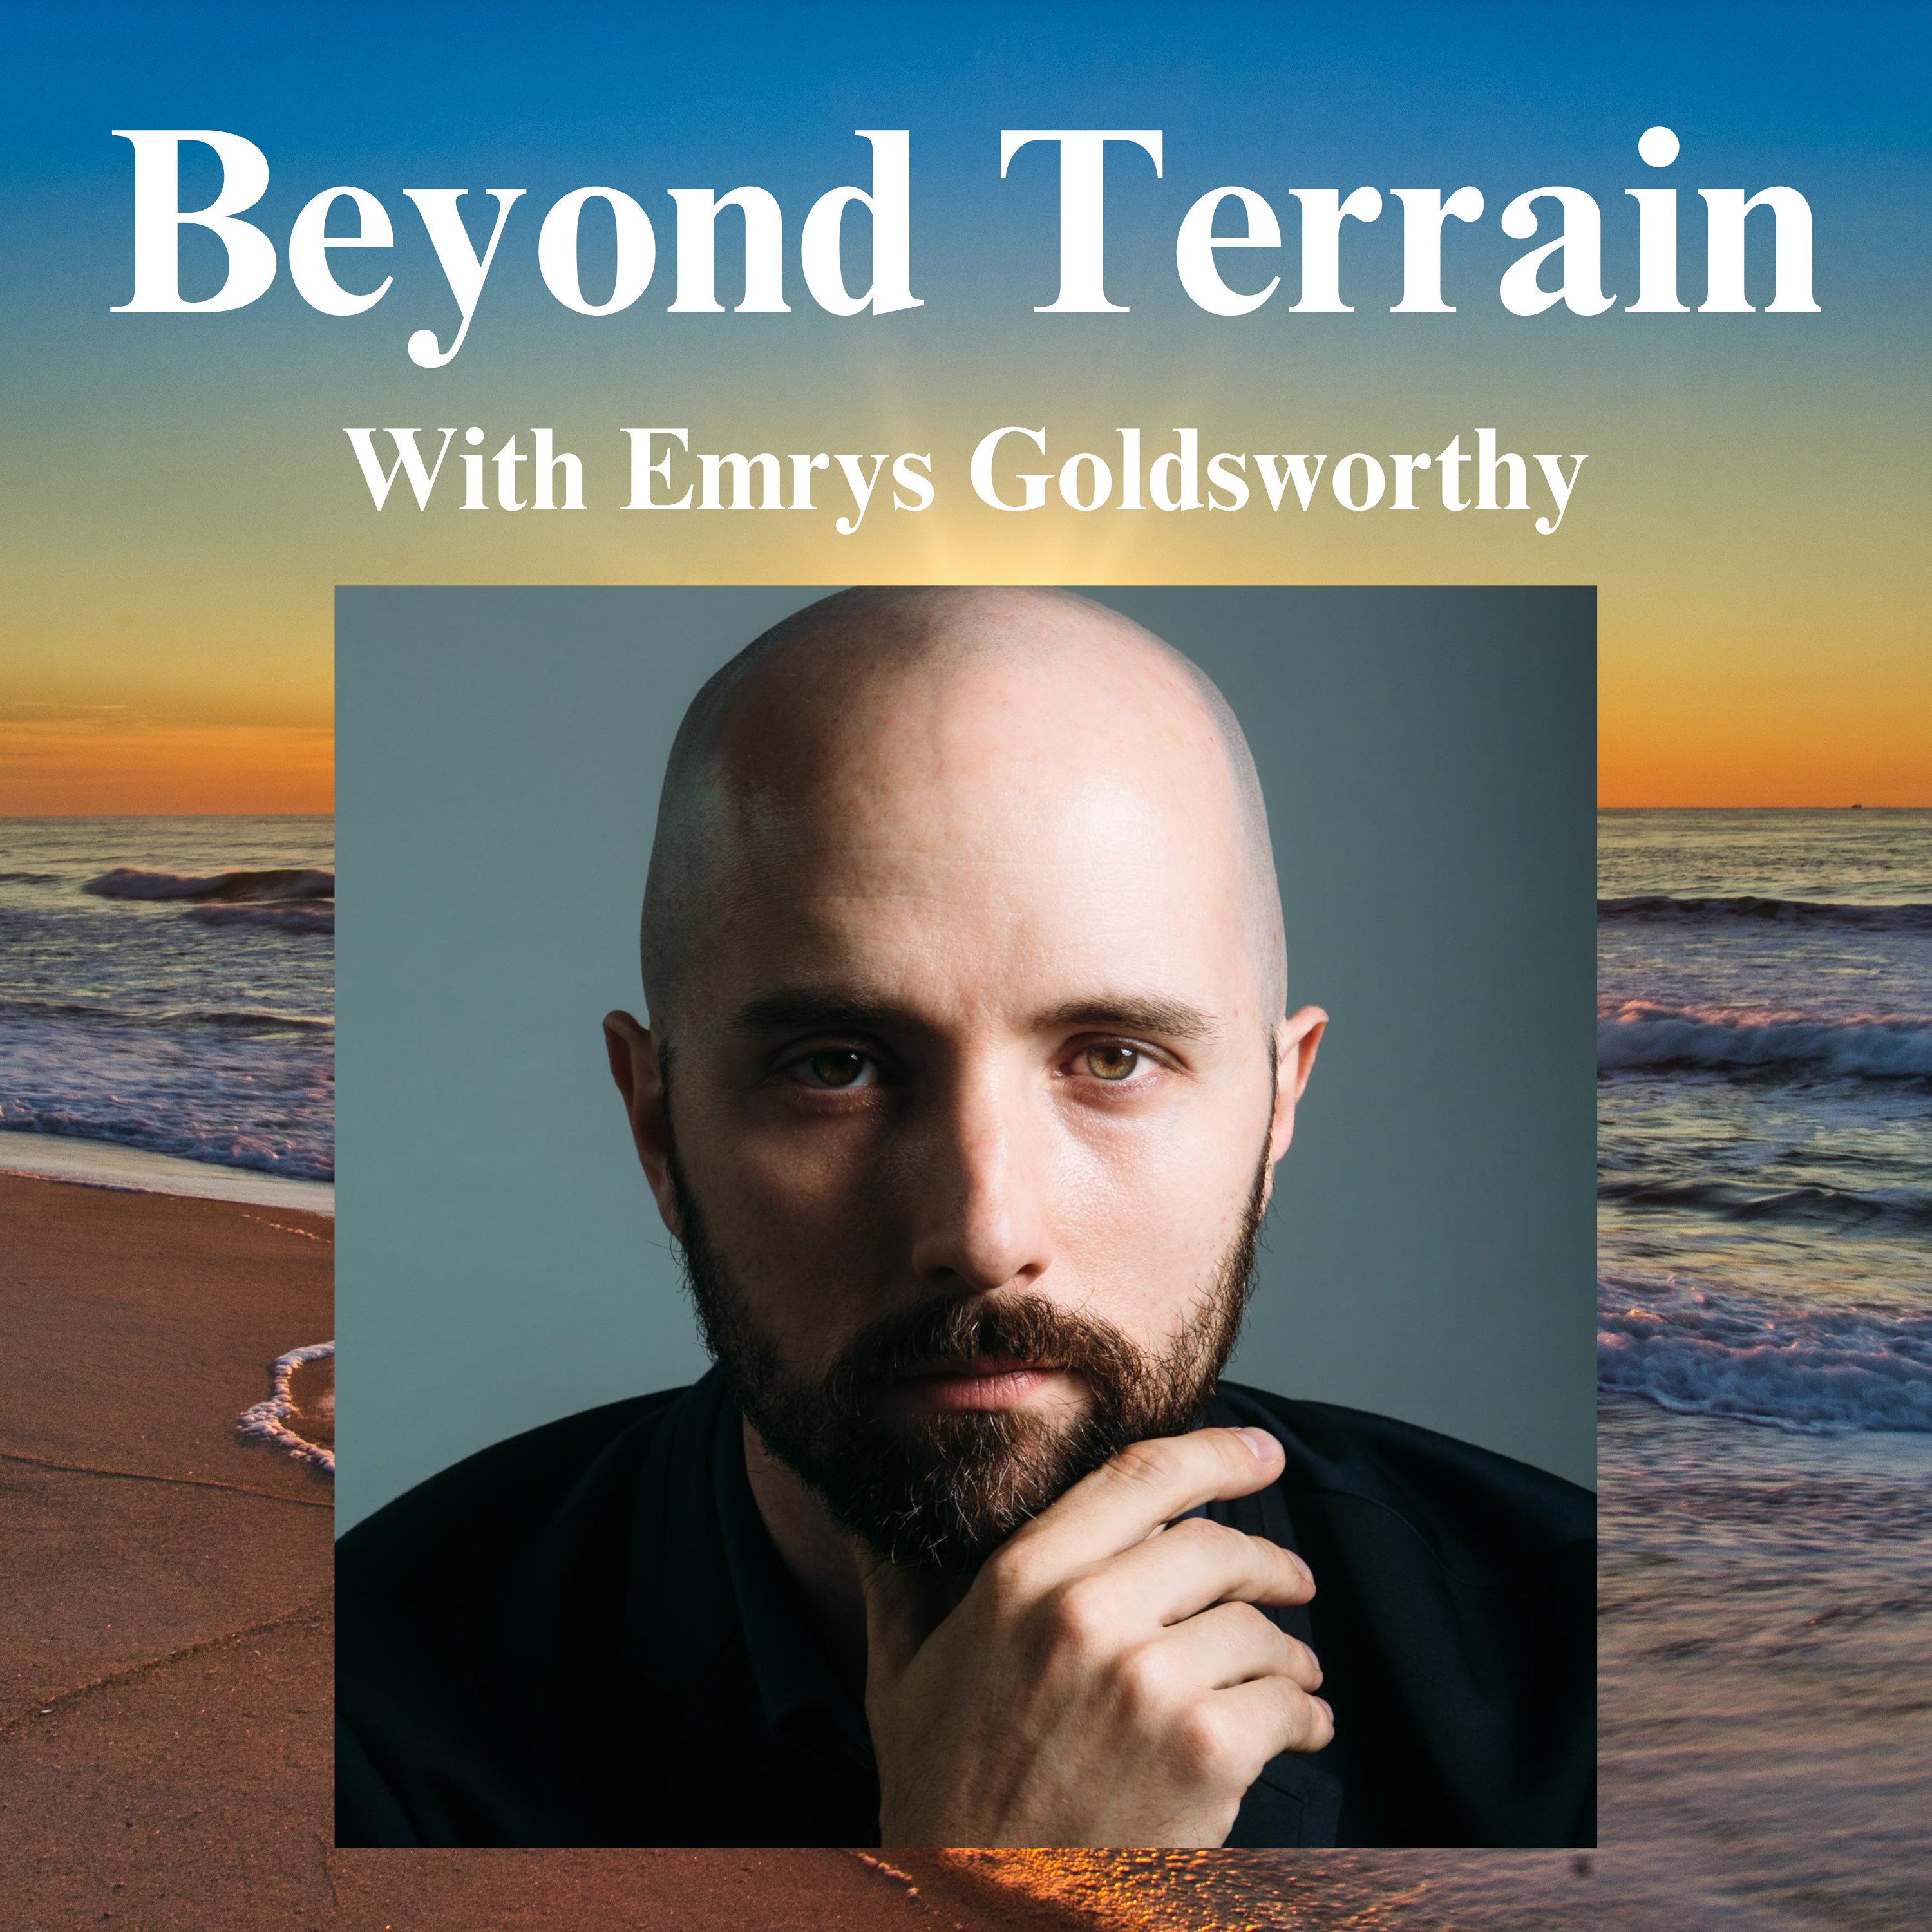 Emrys Goldsworthy on GNM, Nervous system, Movement, Pain, Art, Shock Wave Therapy, EMFs, and More!